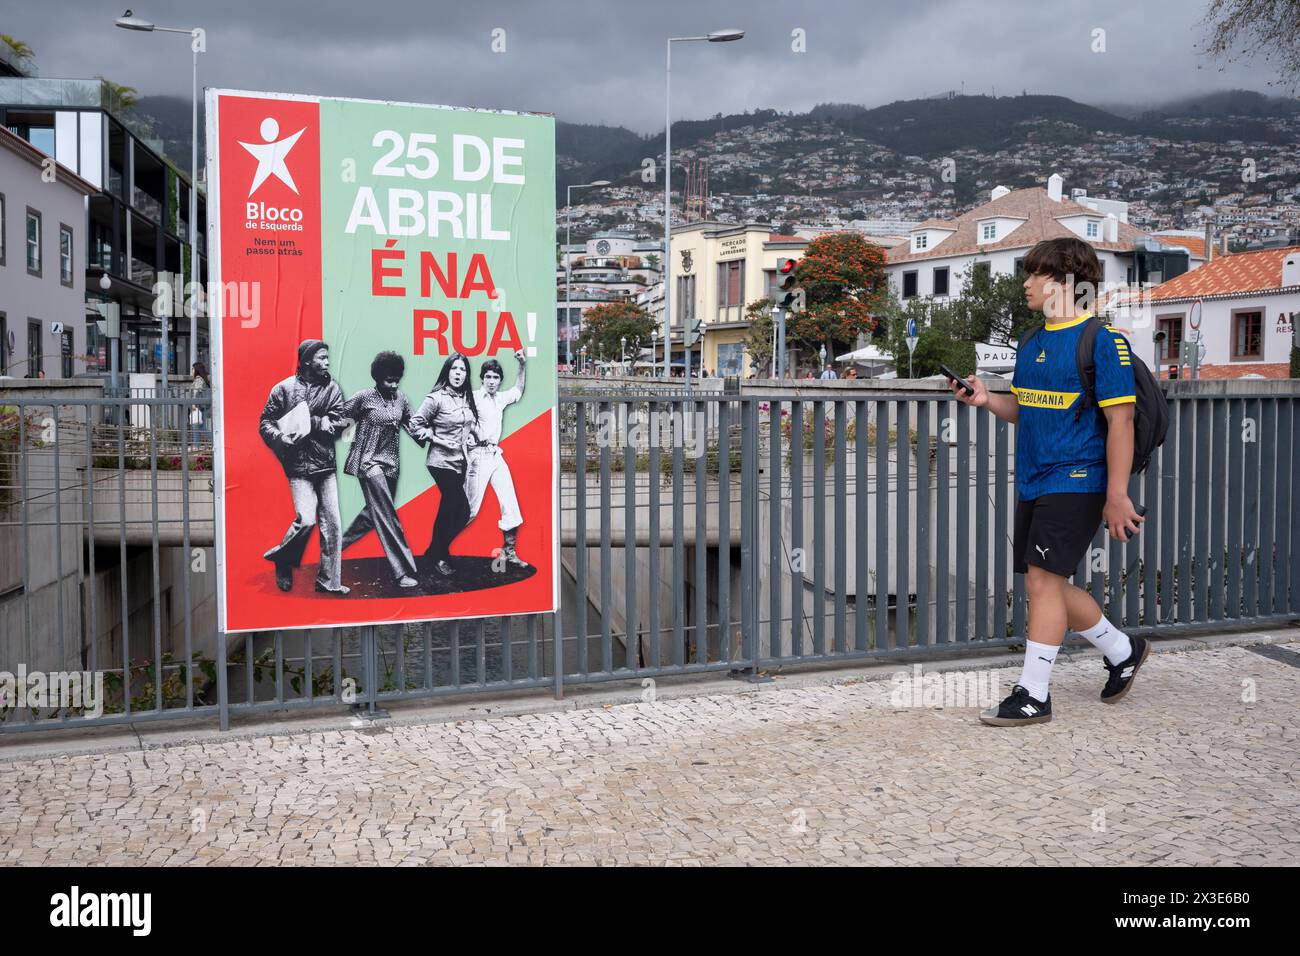 A young Portuguese man walks past a poster by the 'Bloco de Esquerda' political party celebrating the 50th anniversary of Portugal's 'Carnation Revolution, on 18th April 2024, in Funchal, Madeira, Portugal. The bloodless coup that occurred on 25th April 1974 was the result of Air Force officer Felipe Villard Cortez who occupied his commander's room because he wanted a Portuguese democracy and an end to colonial rule.  Bloco de Esquerda ('The Left Bloc') is a left-wing populist, democratic socialist political party in Portugal founded in 1999. Stock Photo